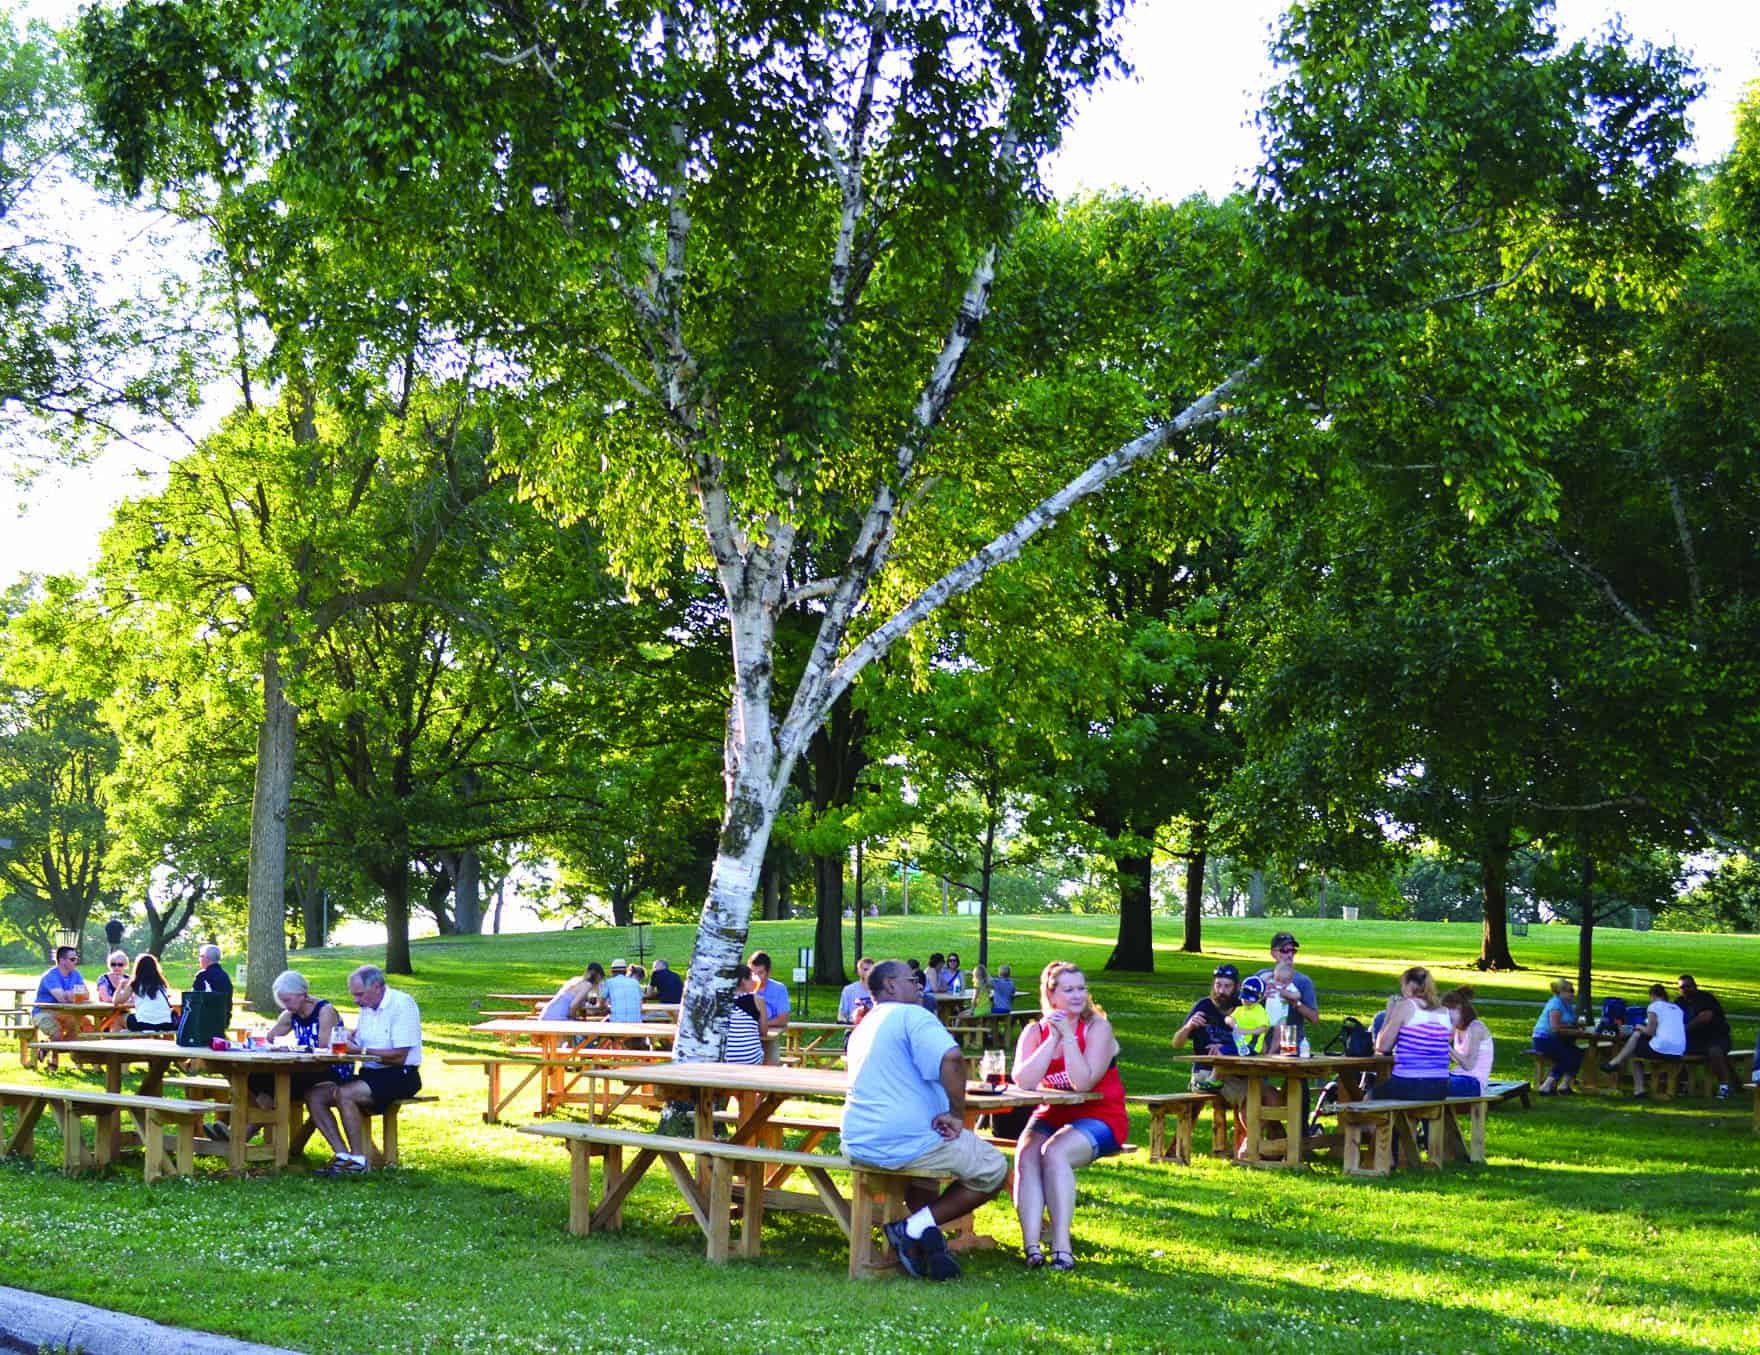 Humboldt Park Beer Garden revives old Milwaukee tradition : The Bay